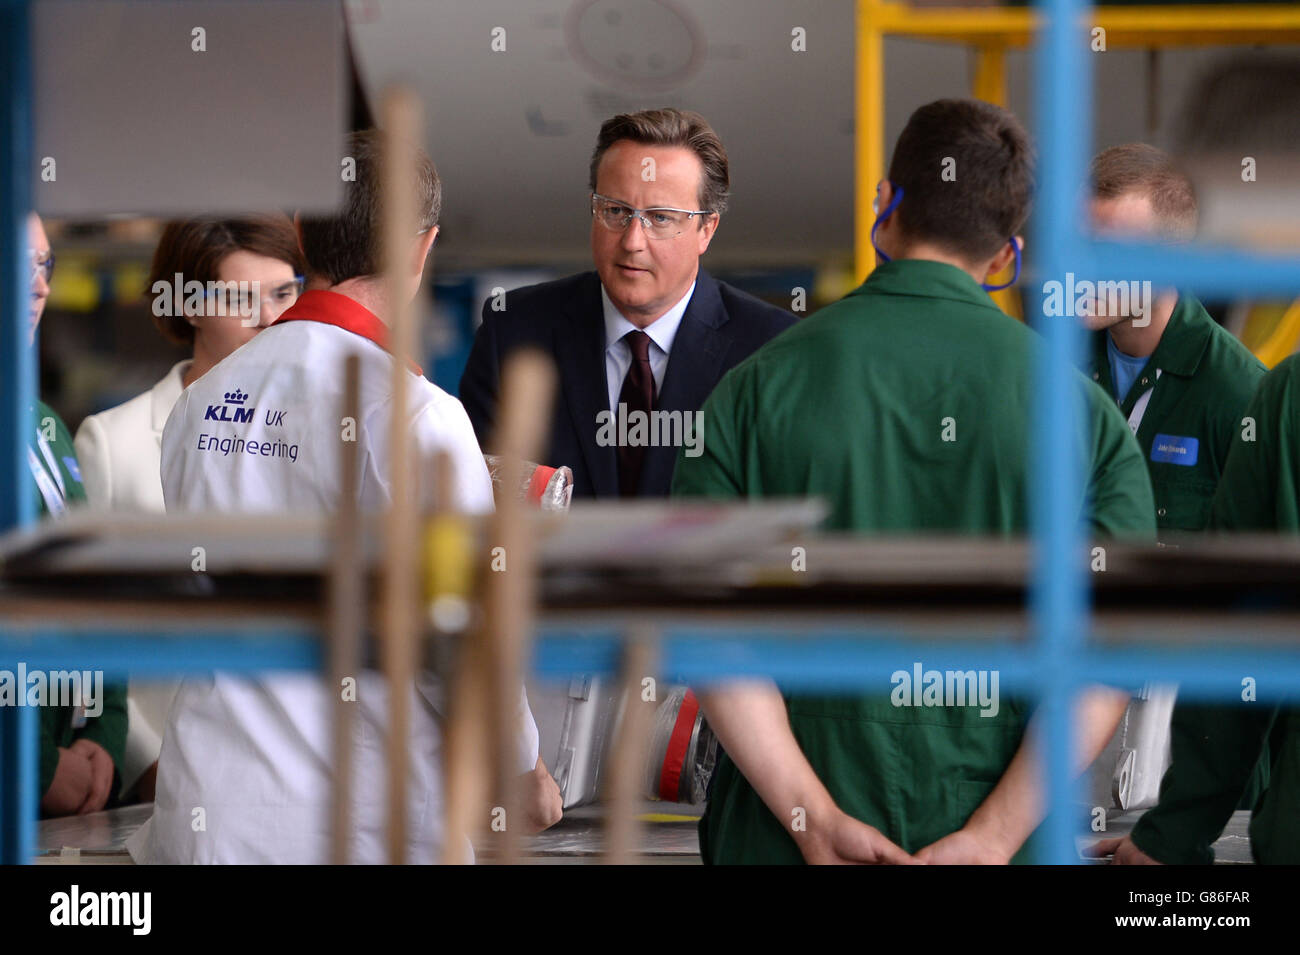 Prime Minister David Cameron meets apprentices employed by KLM Engineering at Norwich Airport in Norfolk, where he restated the importance of apprenticeships to his vision of a 'One Nation' Government. Stock Photo